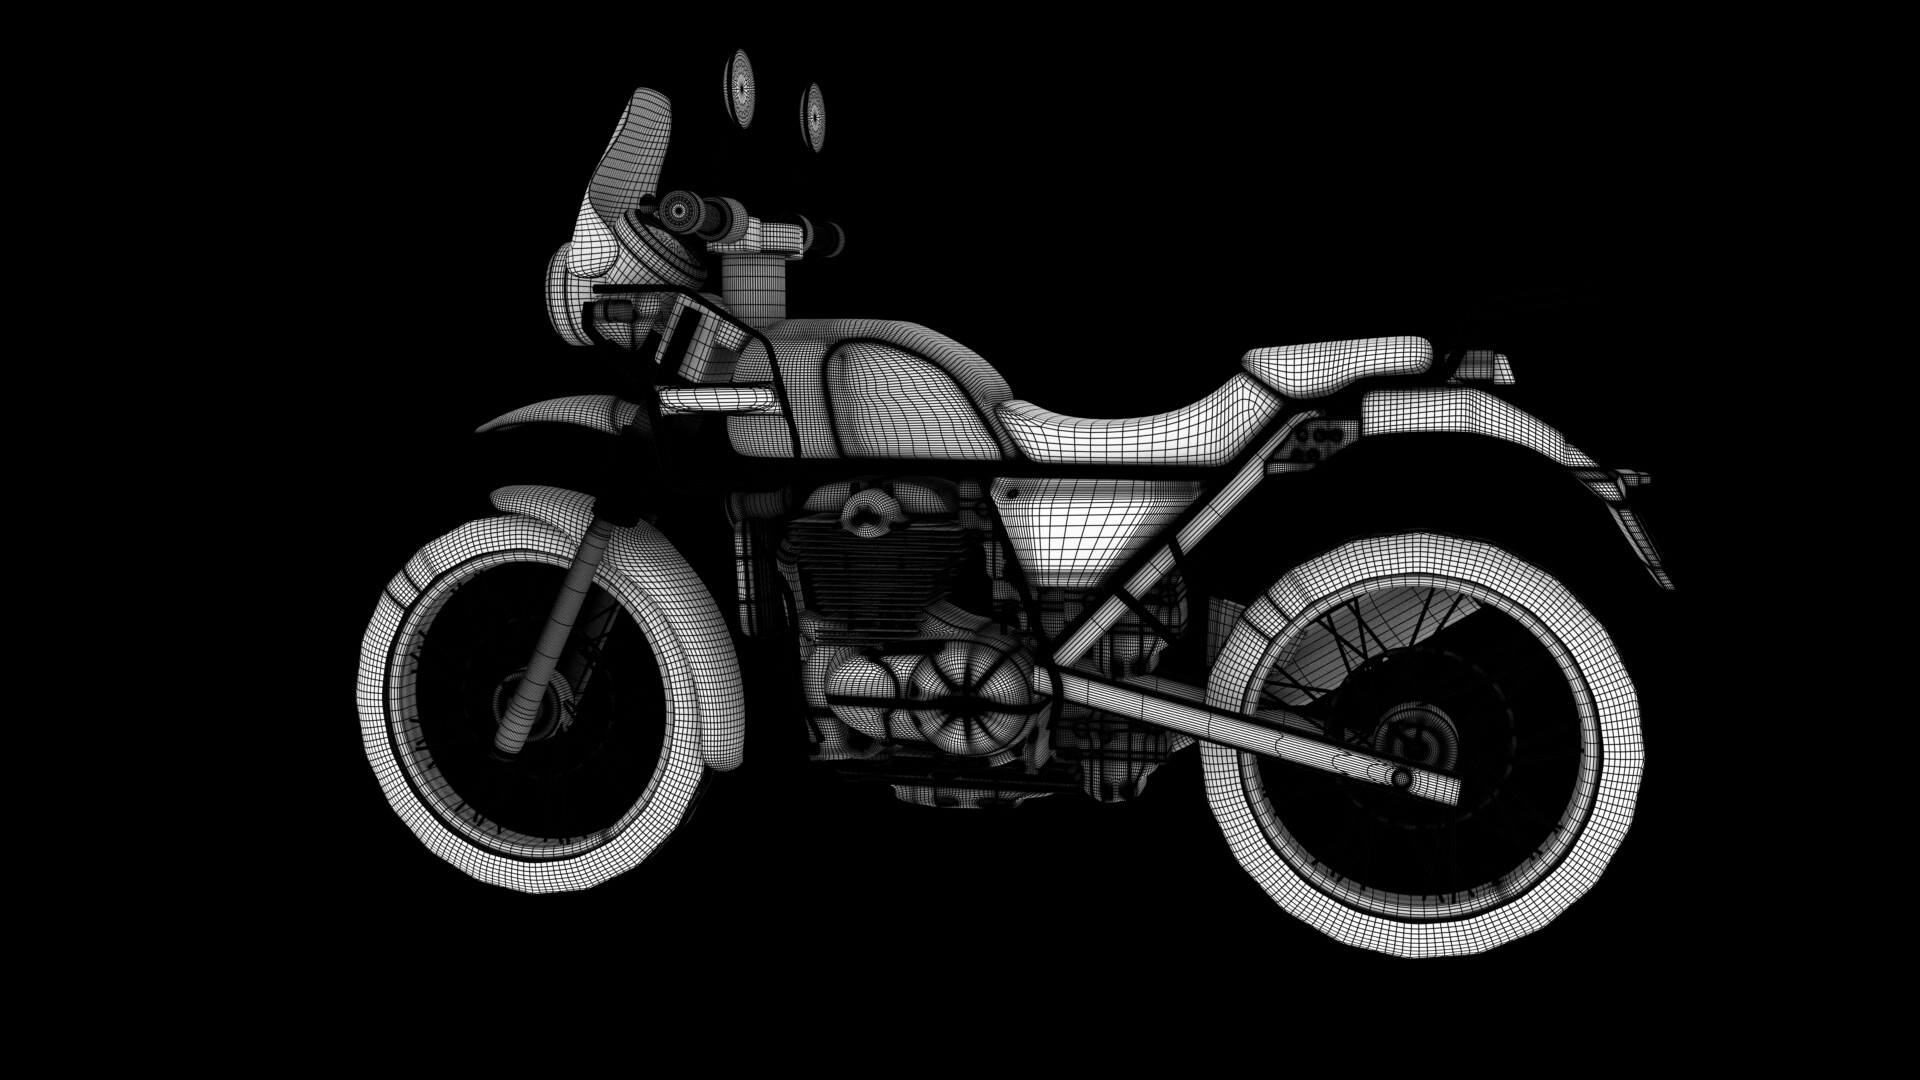 Sketches of what could have been the Royal Enfield Himalayan